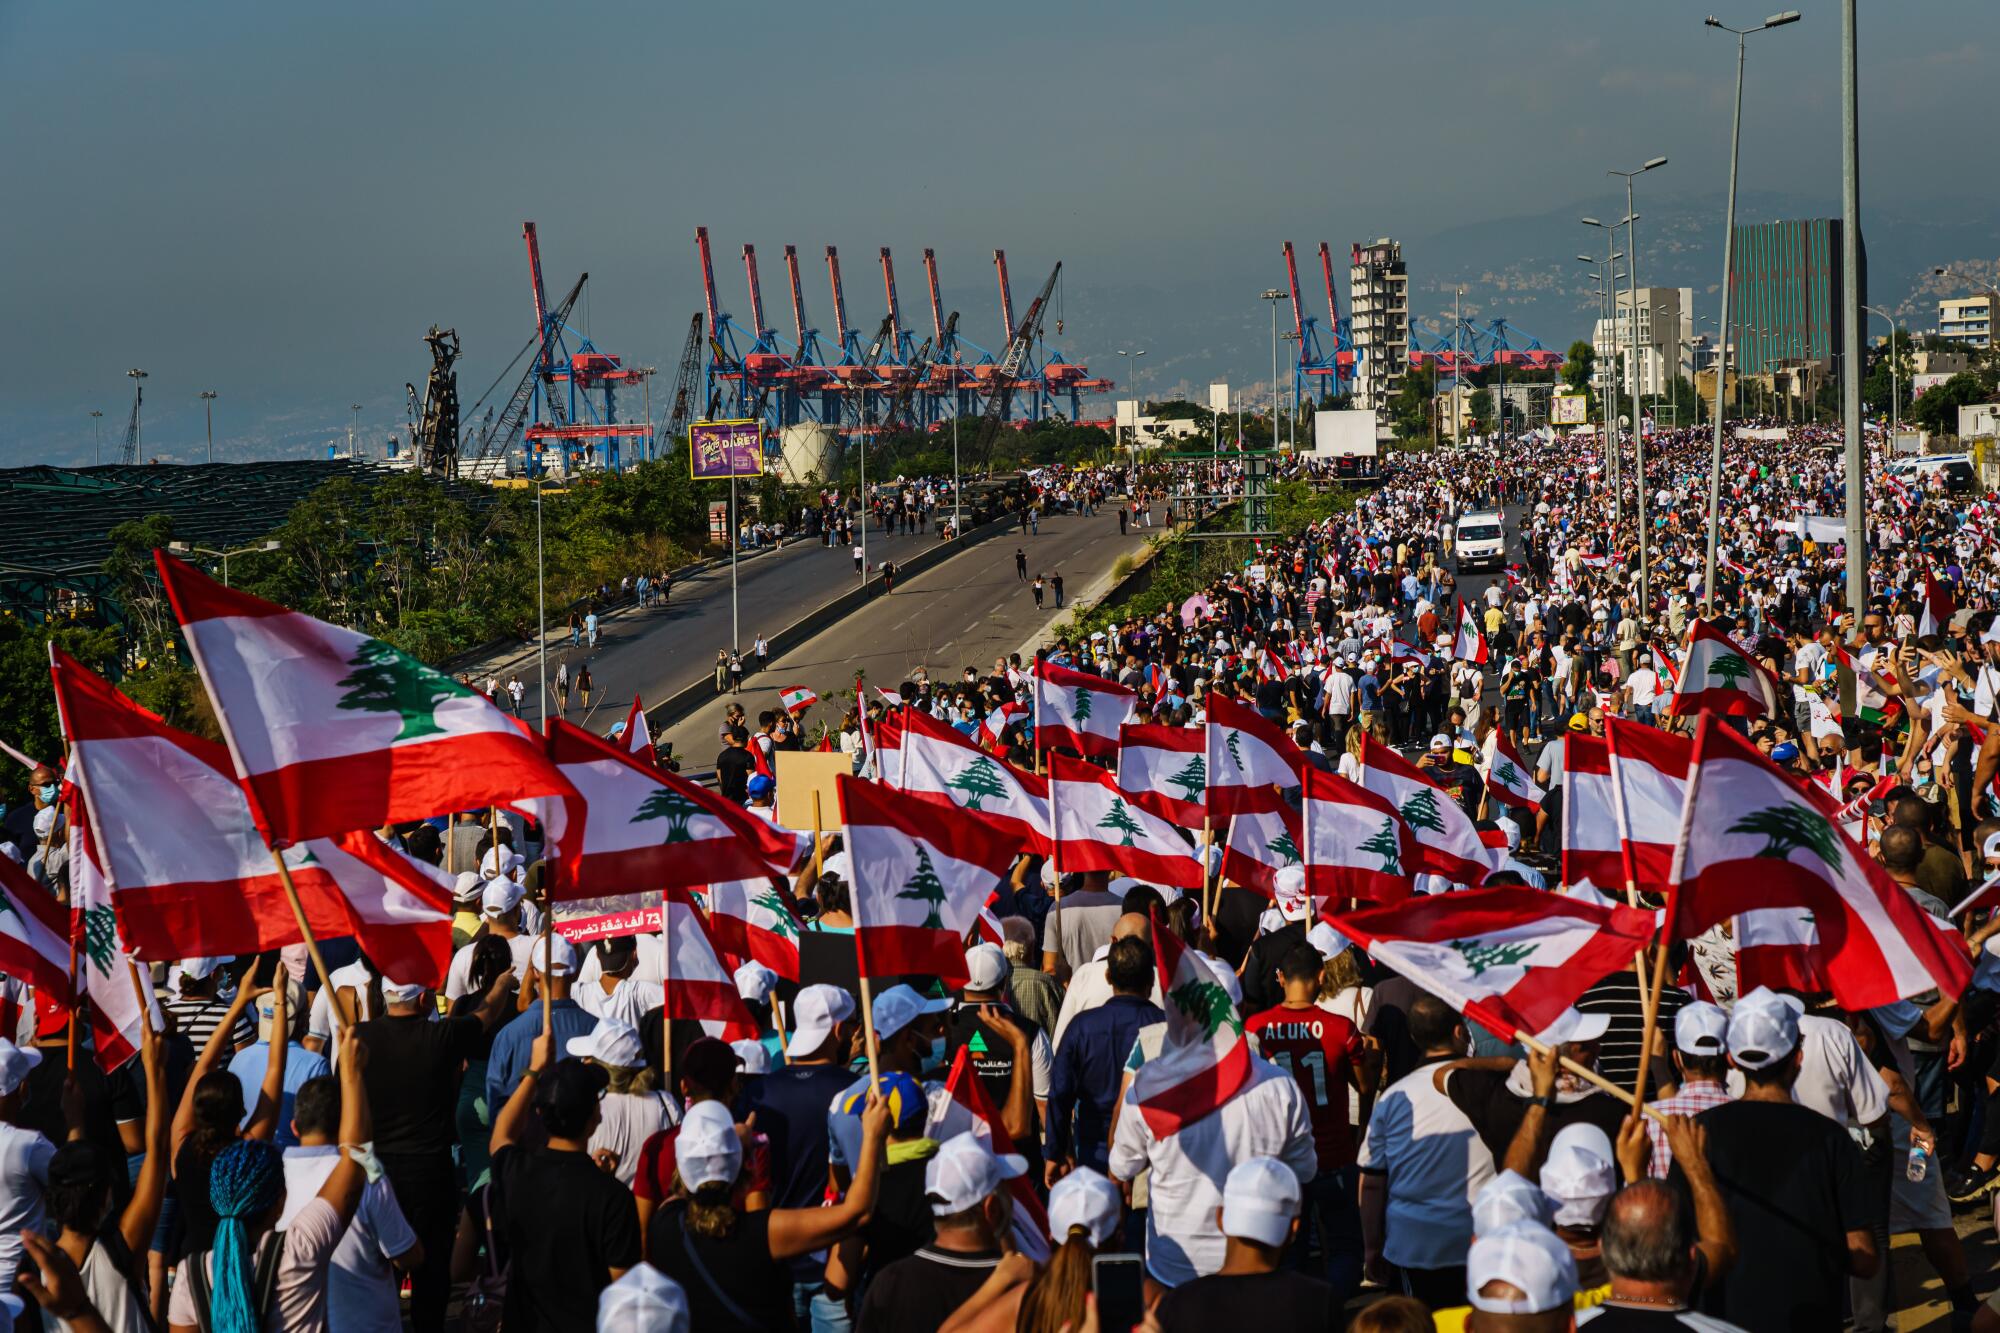 People wave Lebanese flags. In the background is a port.